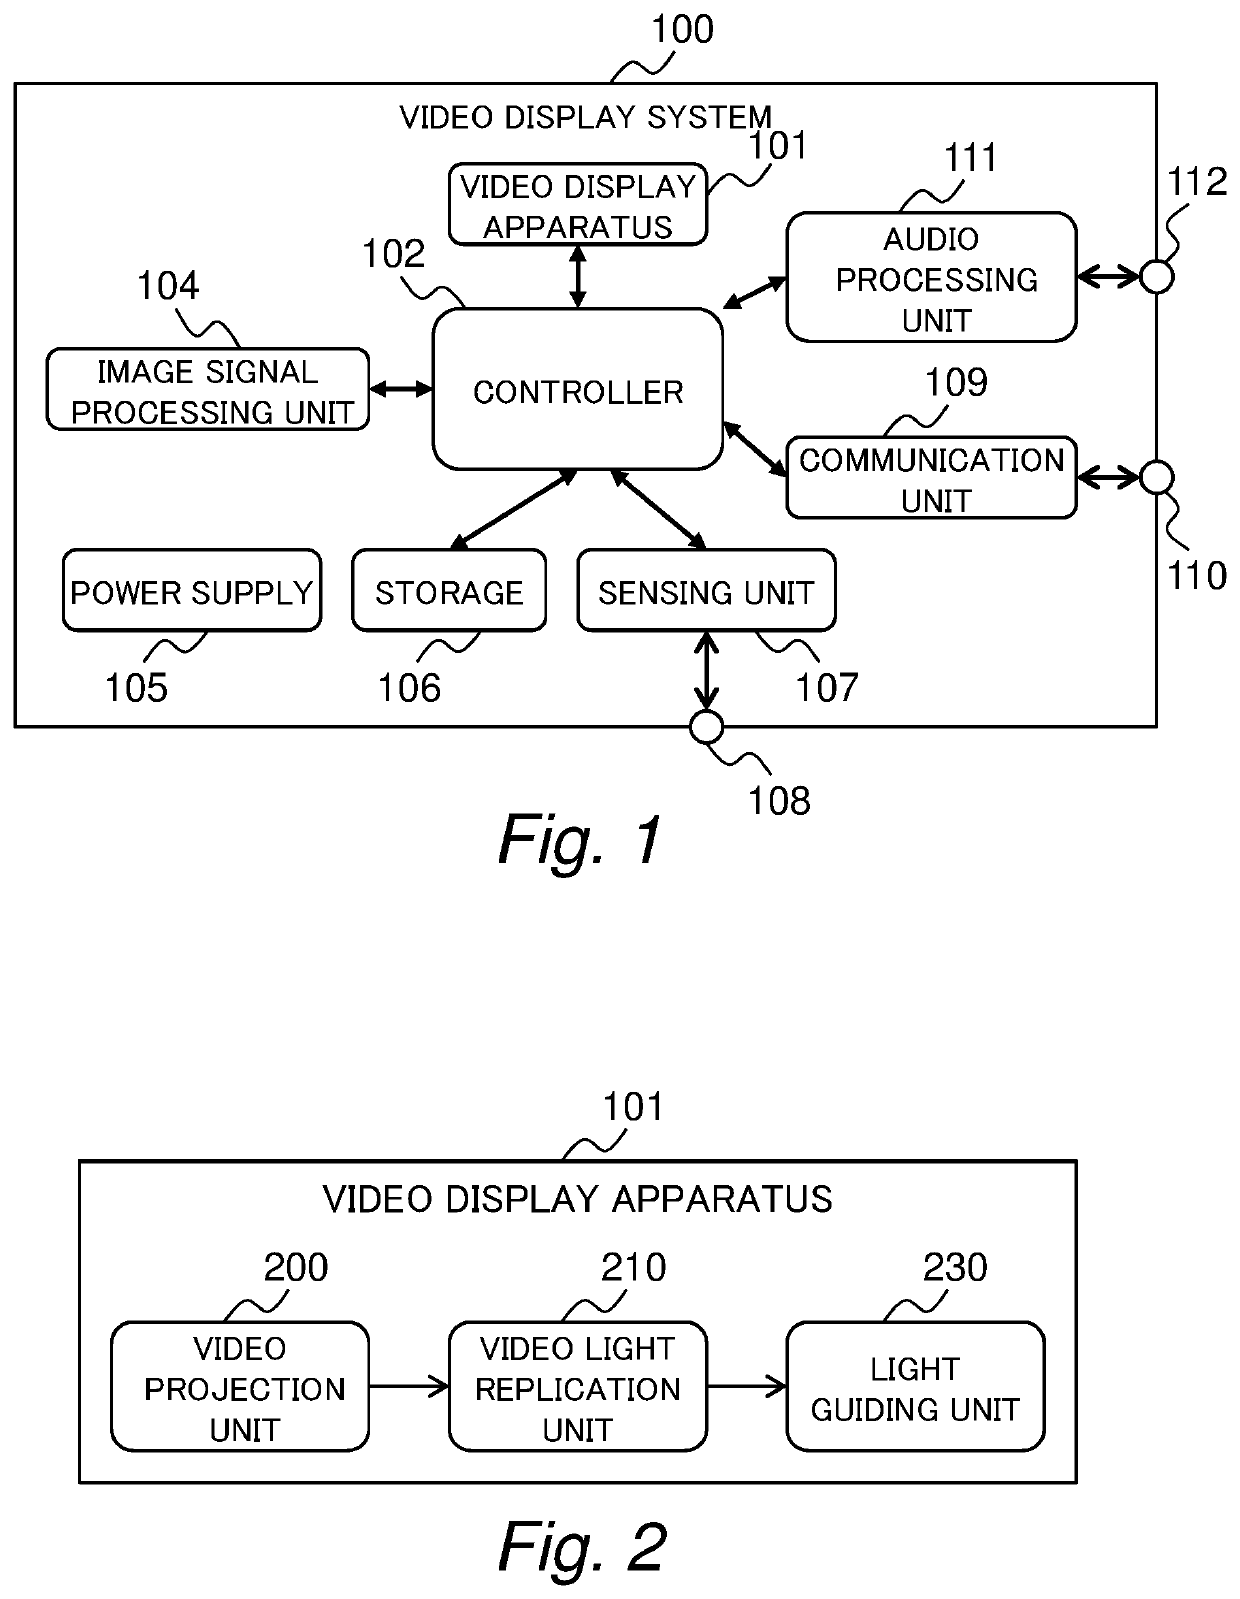 Video display apparatus and video display system